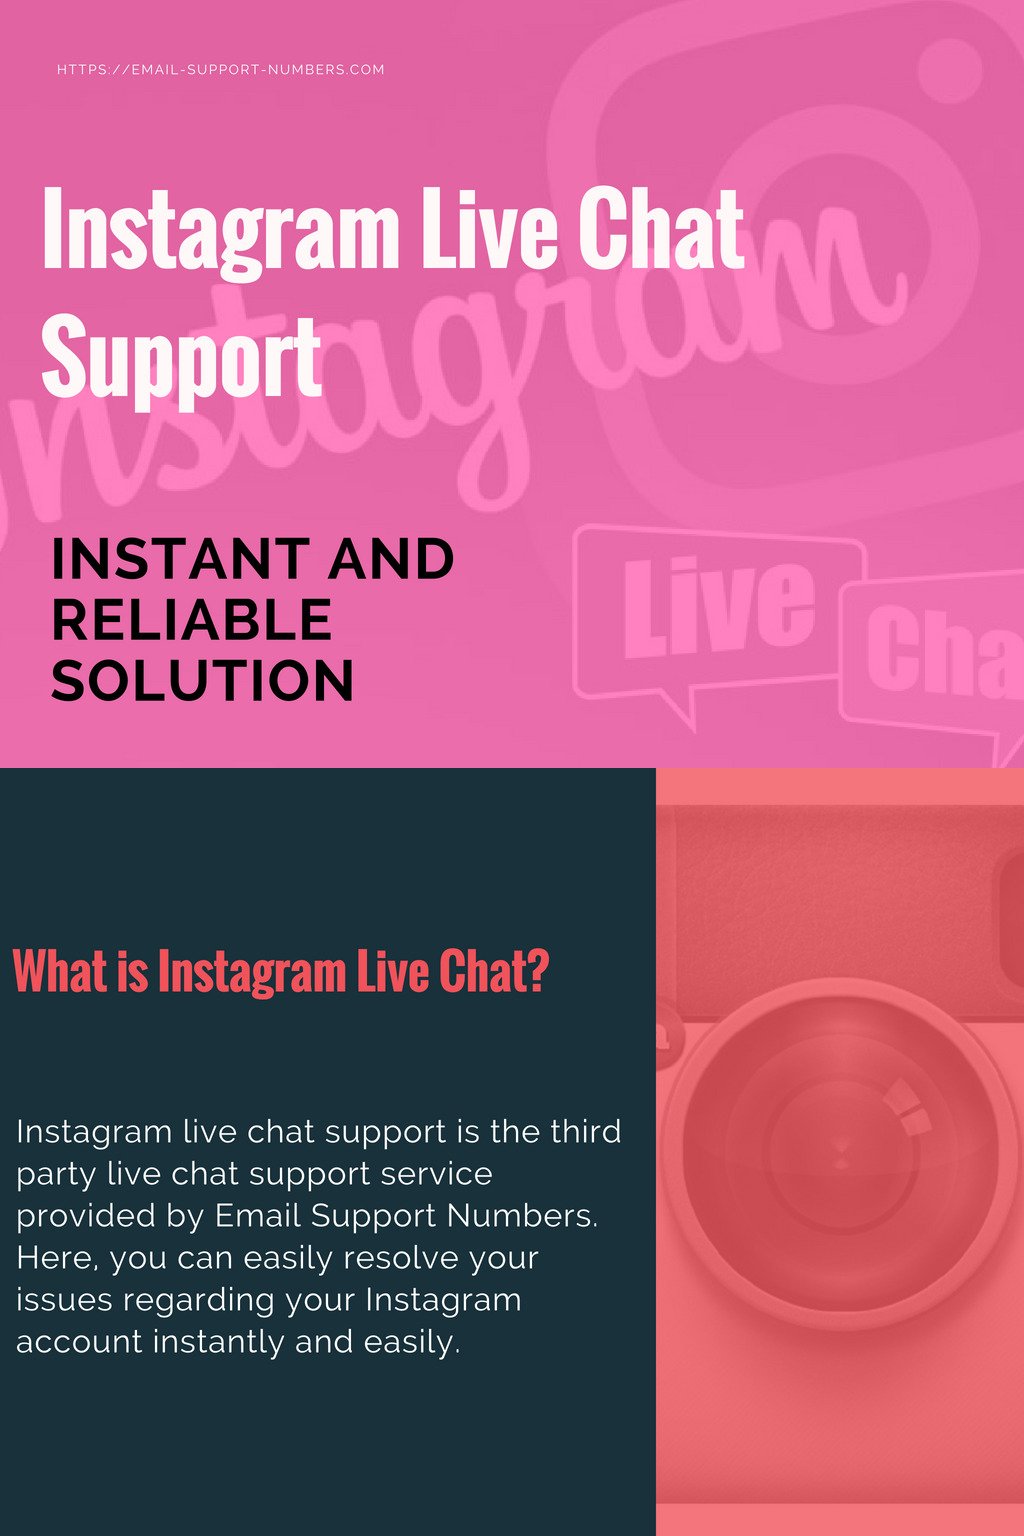 Instagram support live chat